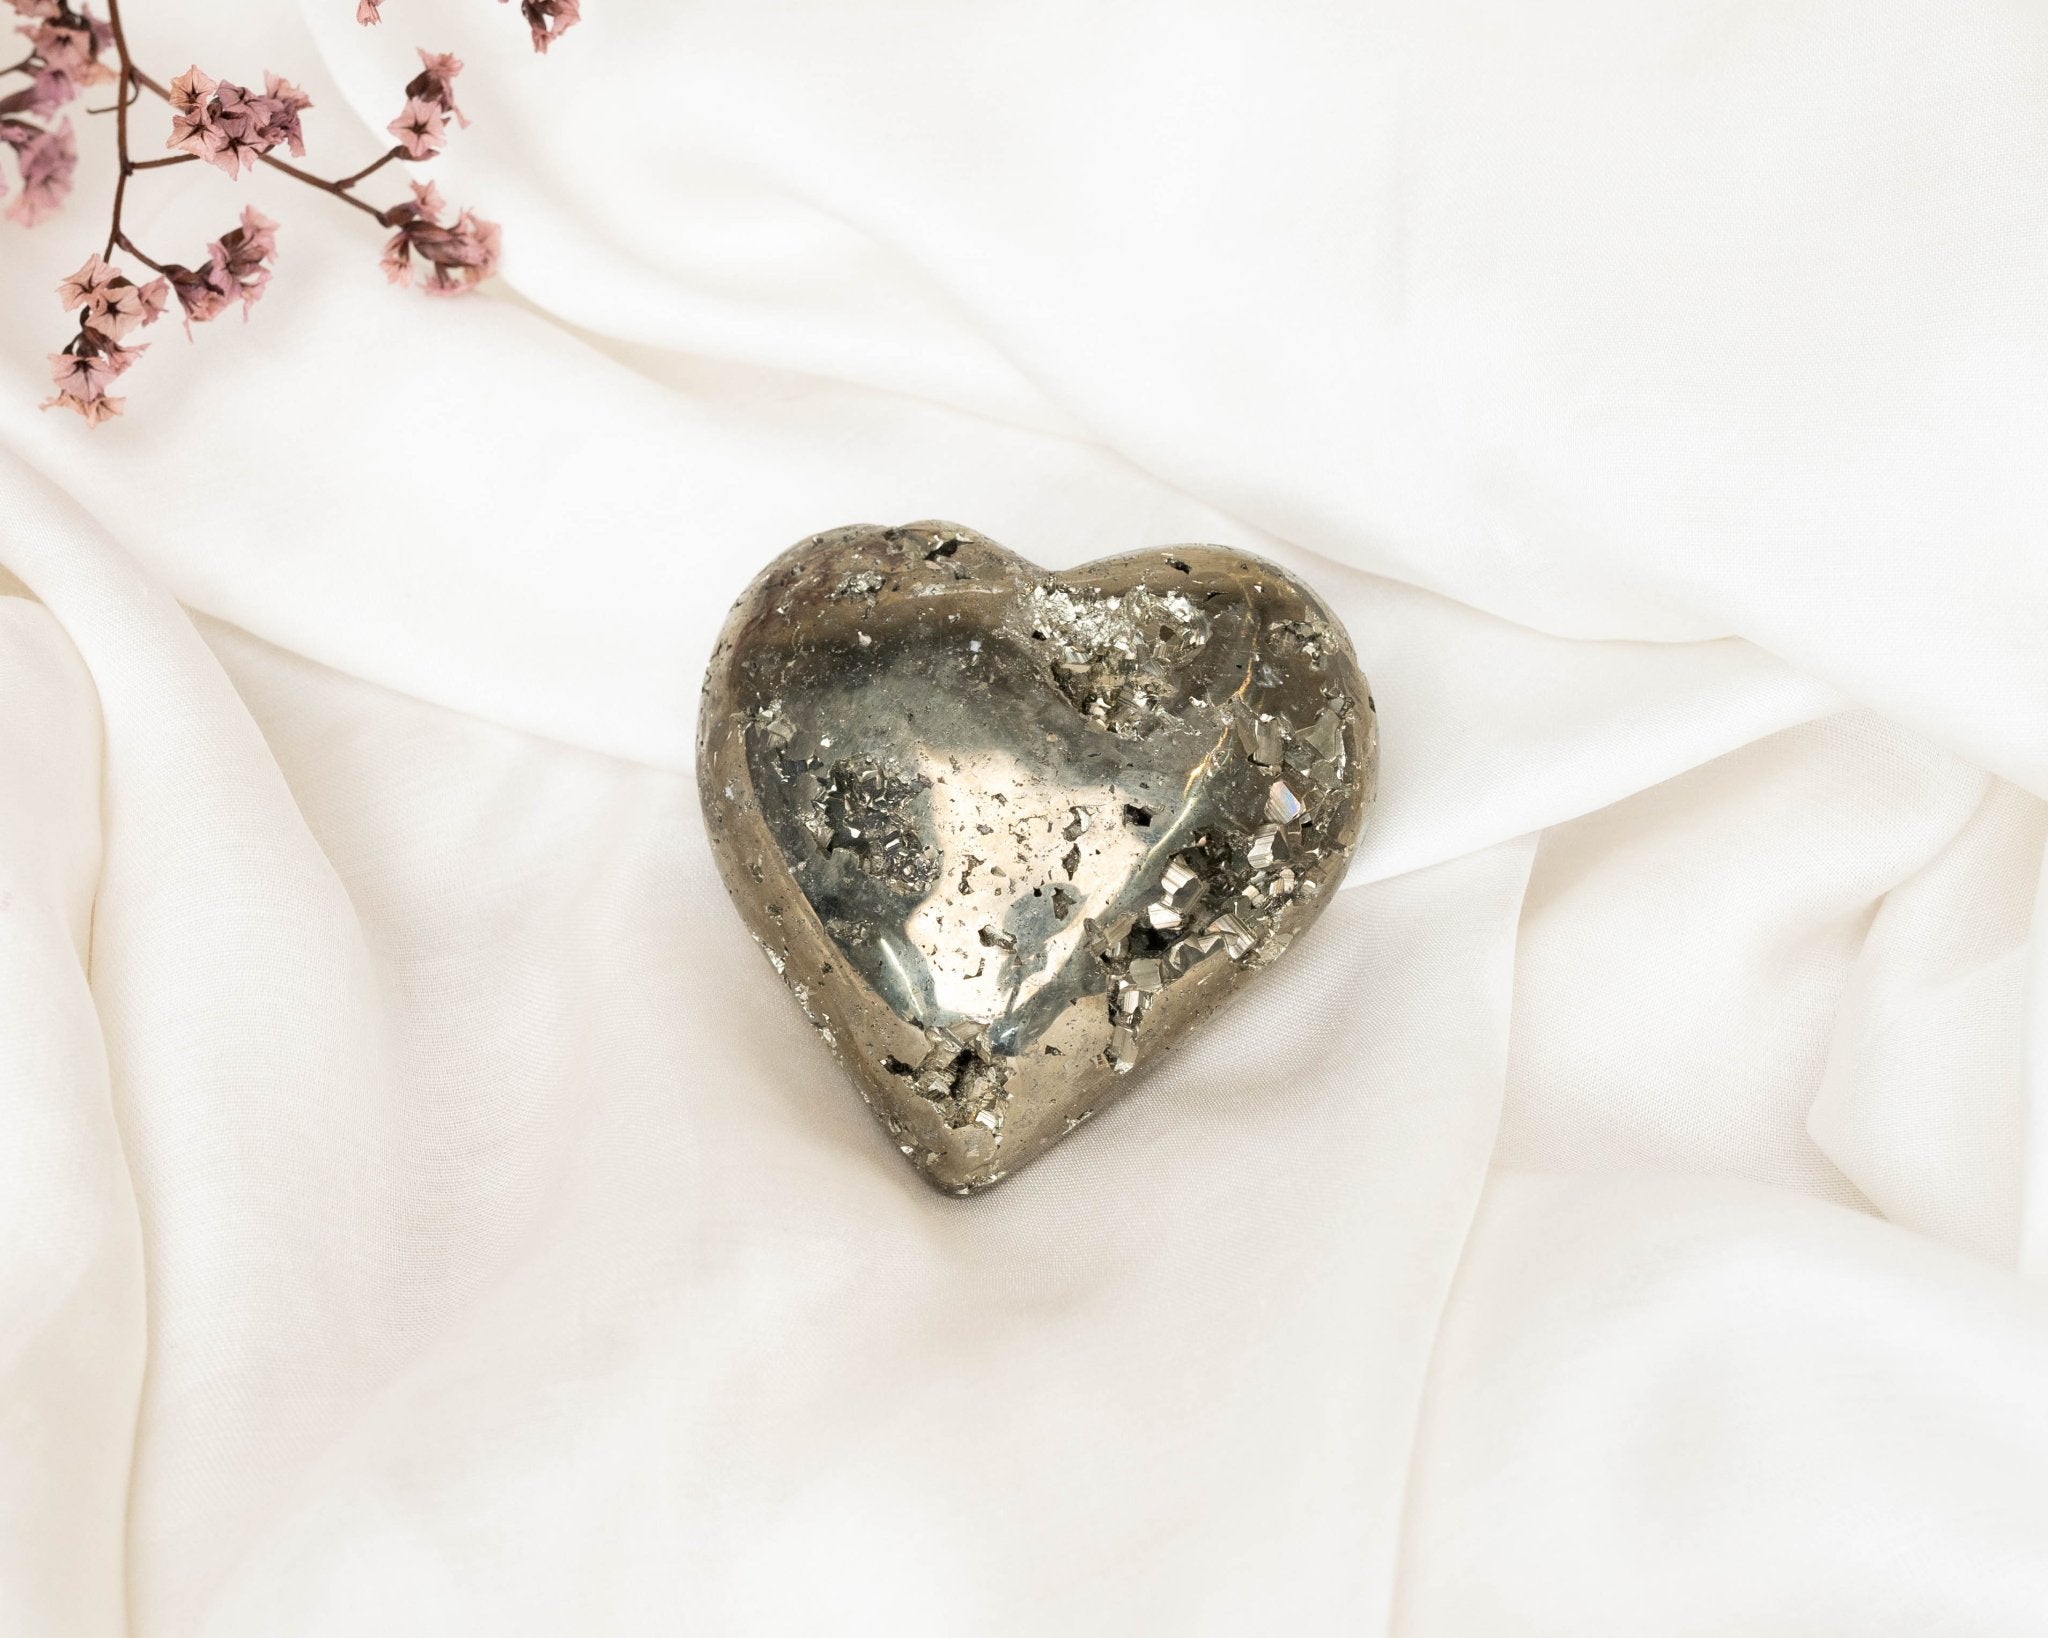 Iron Pyrite Heart 202.5g - Bodh Gem and Crystals